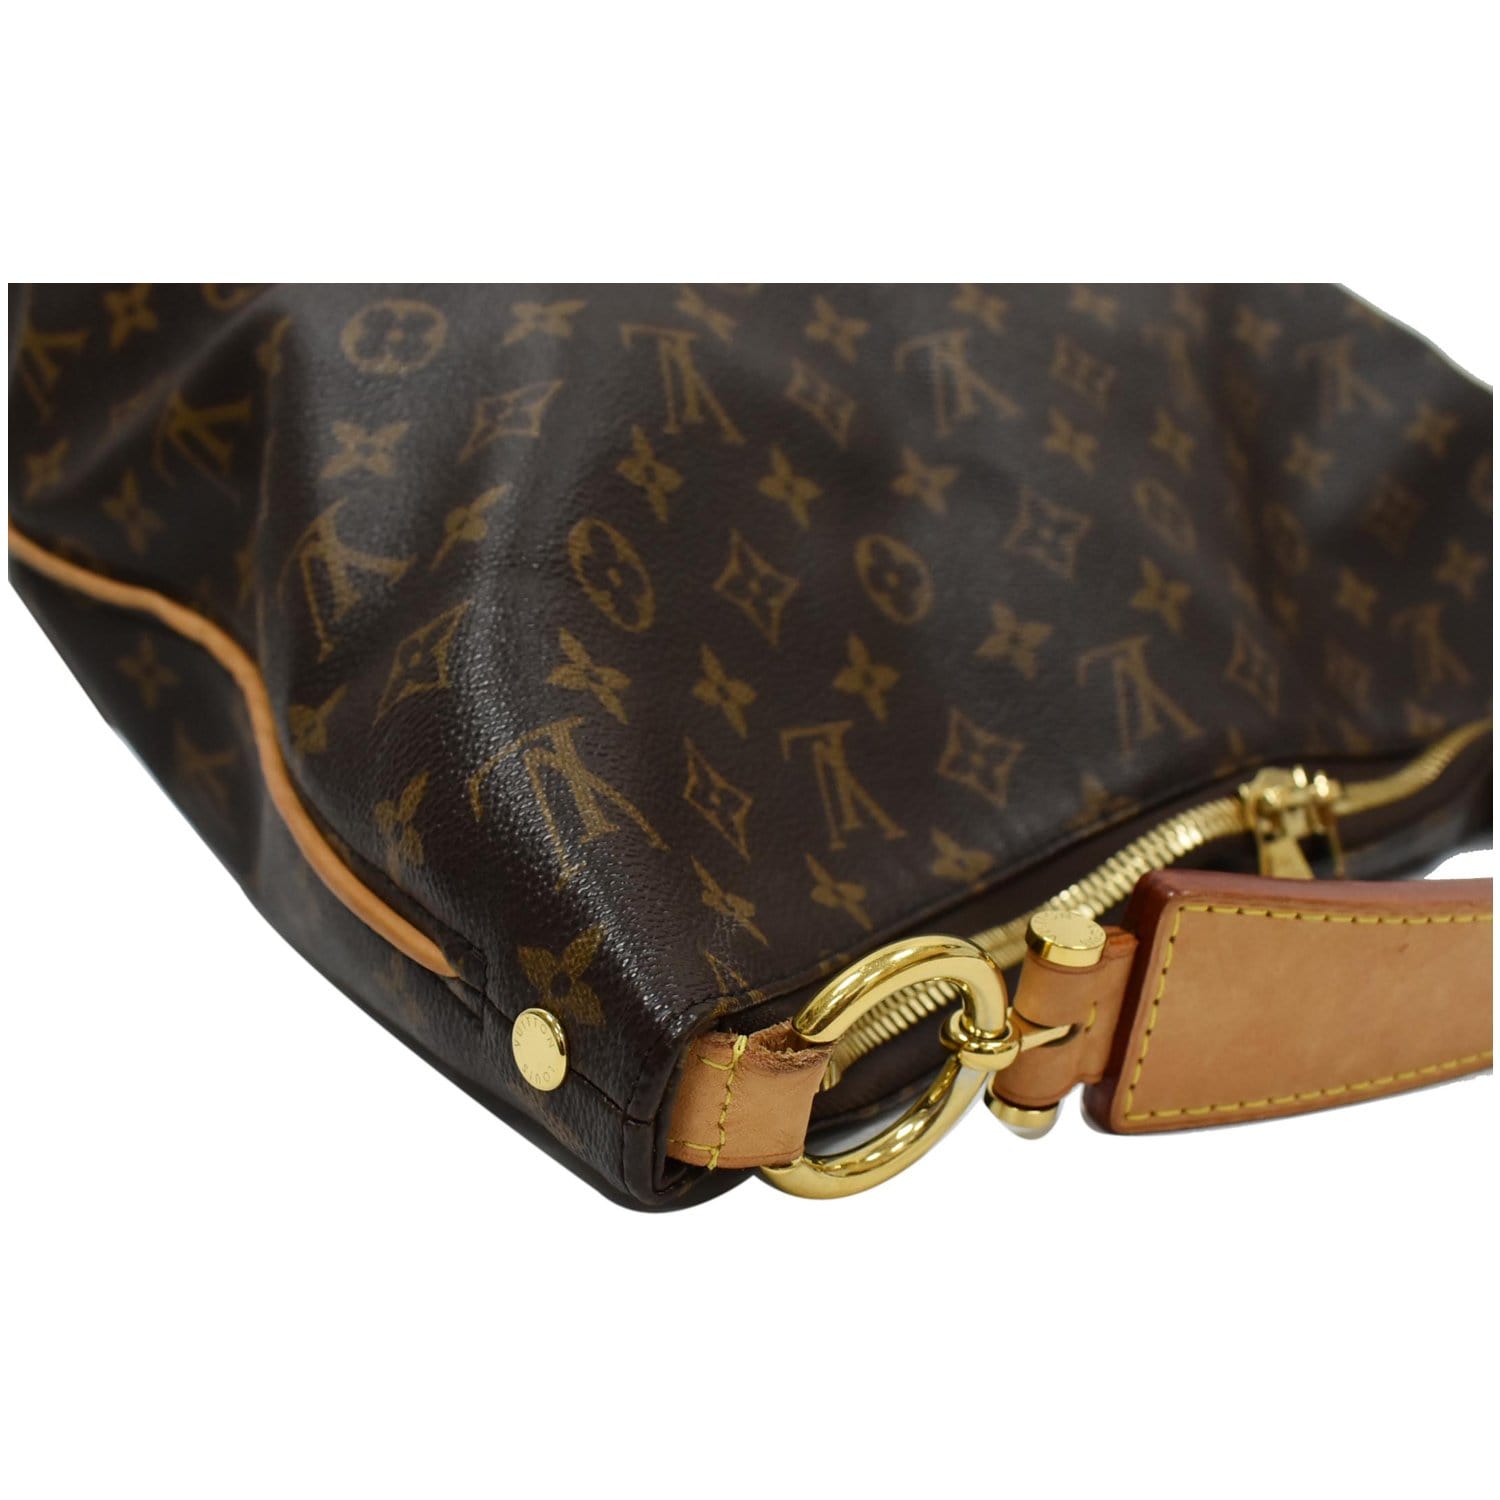 LOUIS VUITTON LOUIS VUITTON Sully MM Shoulder Bag M40587 Monogram canvas  Brown Used M40587｜Product Code：2101216990678｜BRAND OFF Online Store